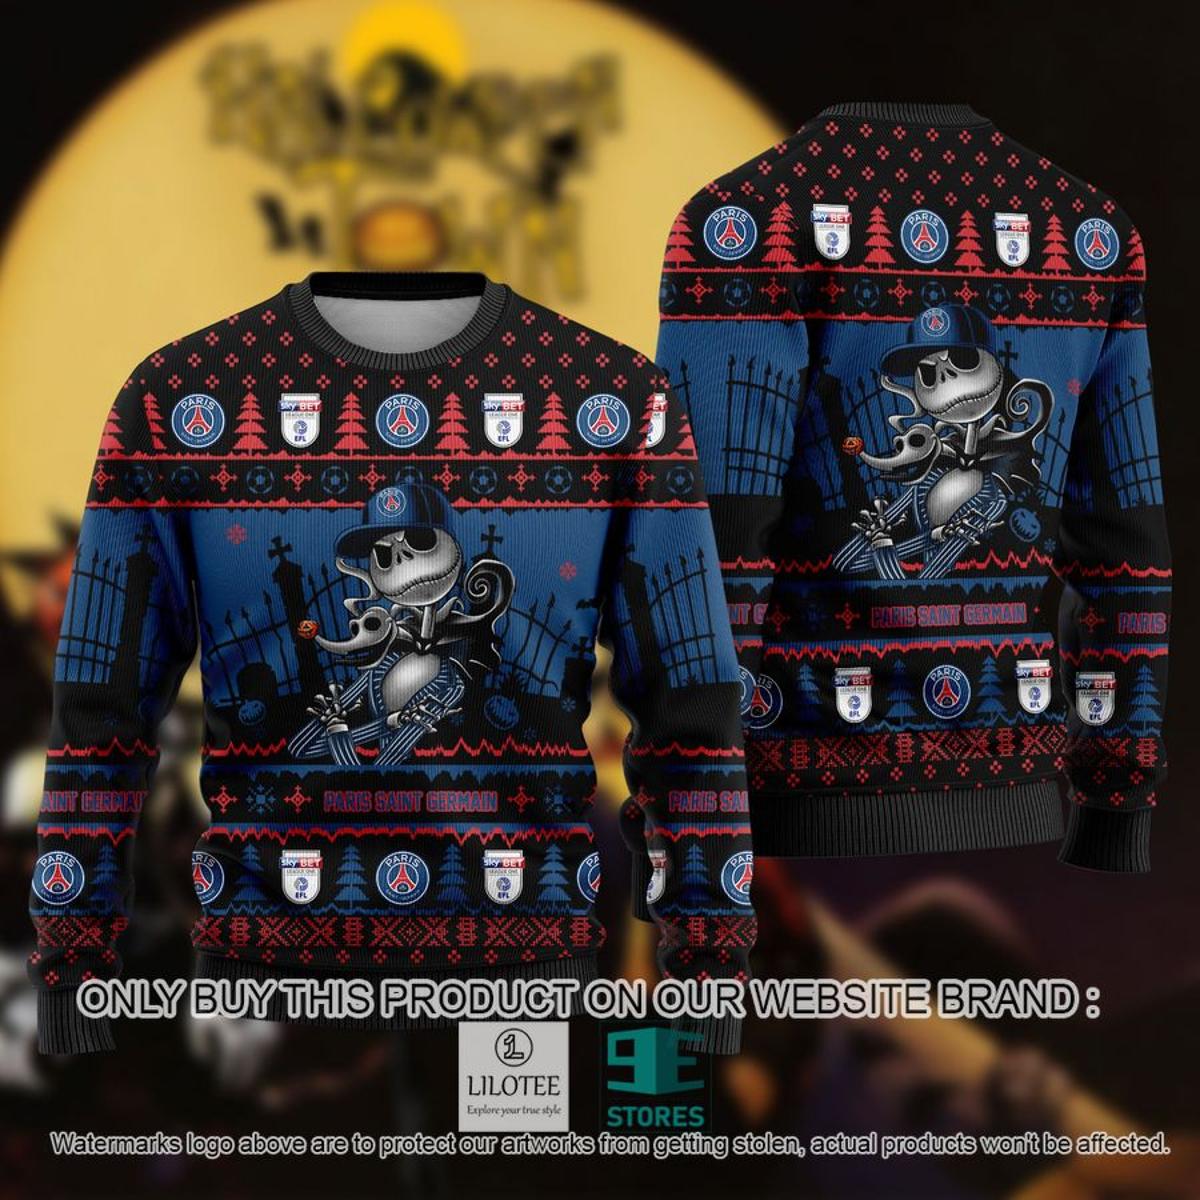 Paris Saint-germain Fc Rick And Morty Ugly Christmas Sweater For Fans